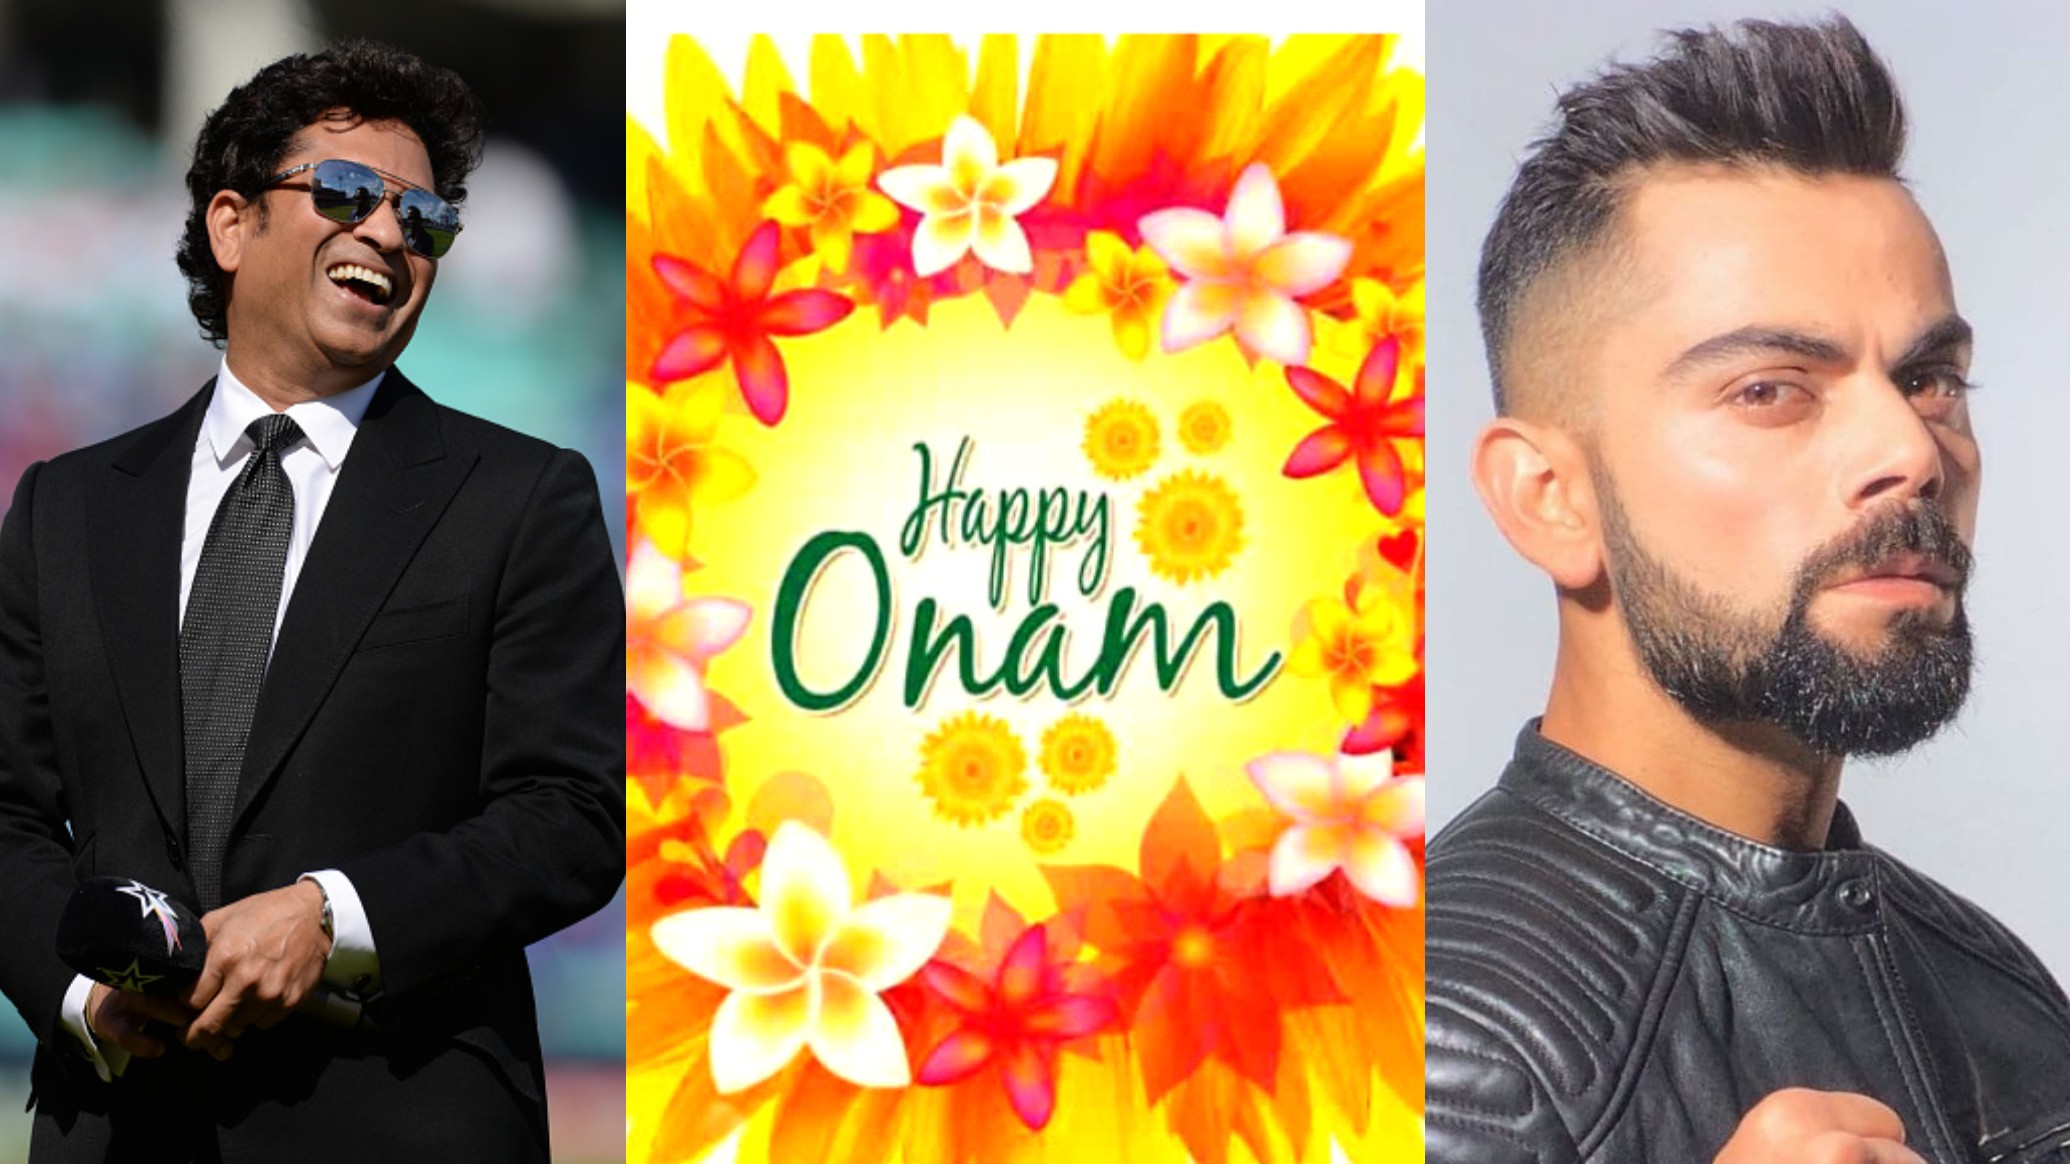 Indian cricket fraternity sends wishes on the occasion of Onam festival